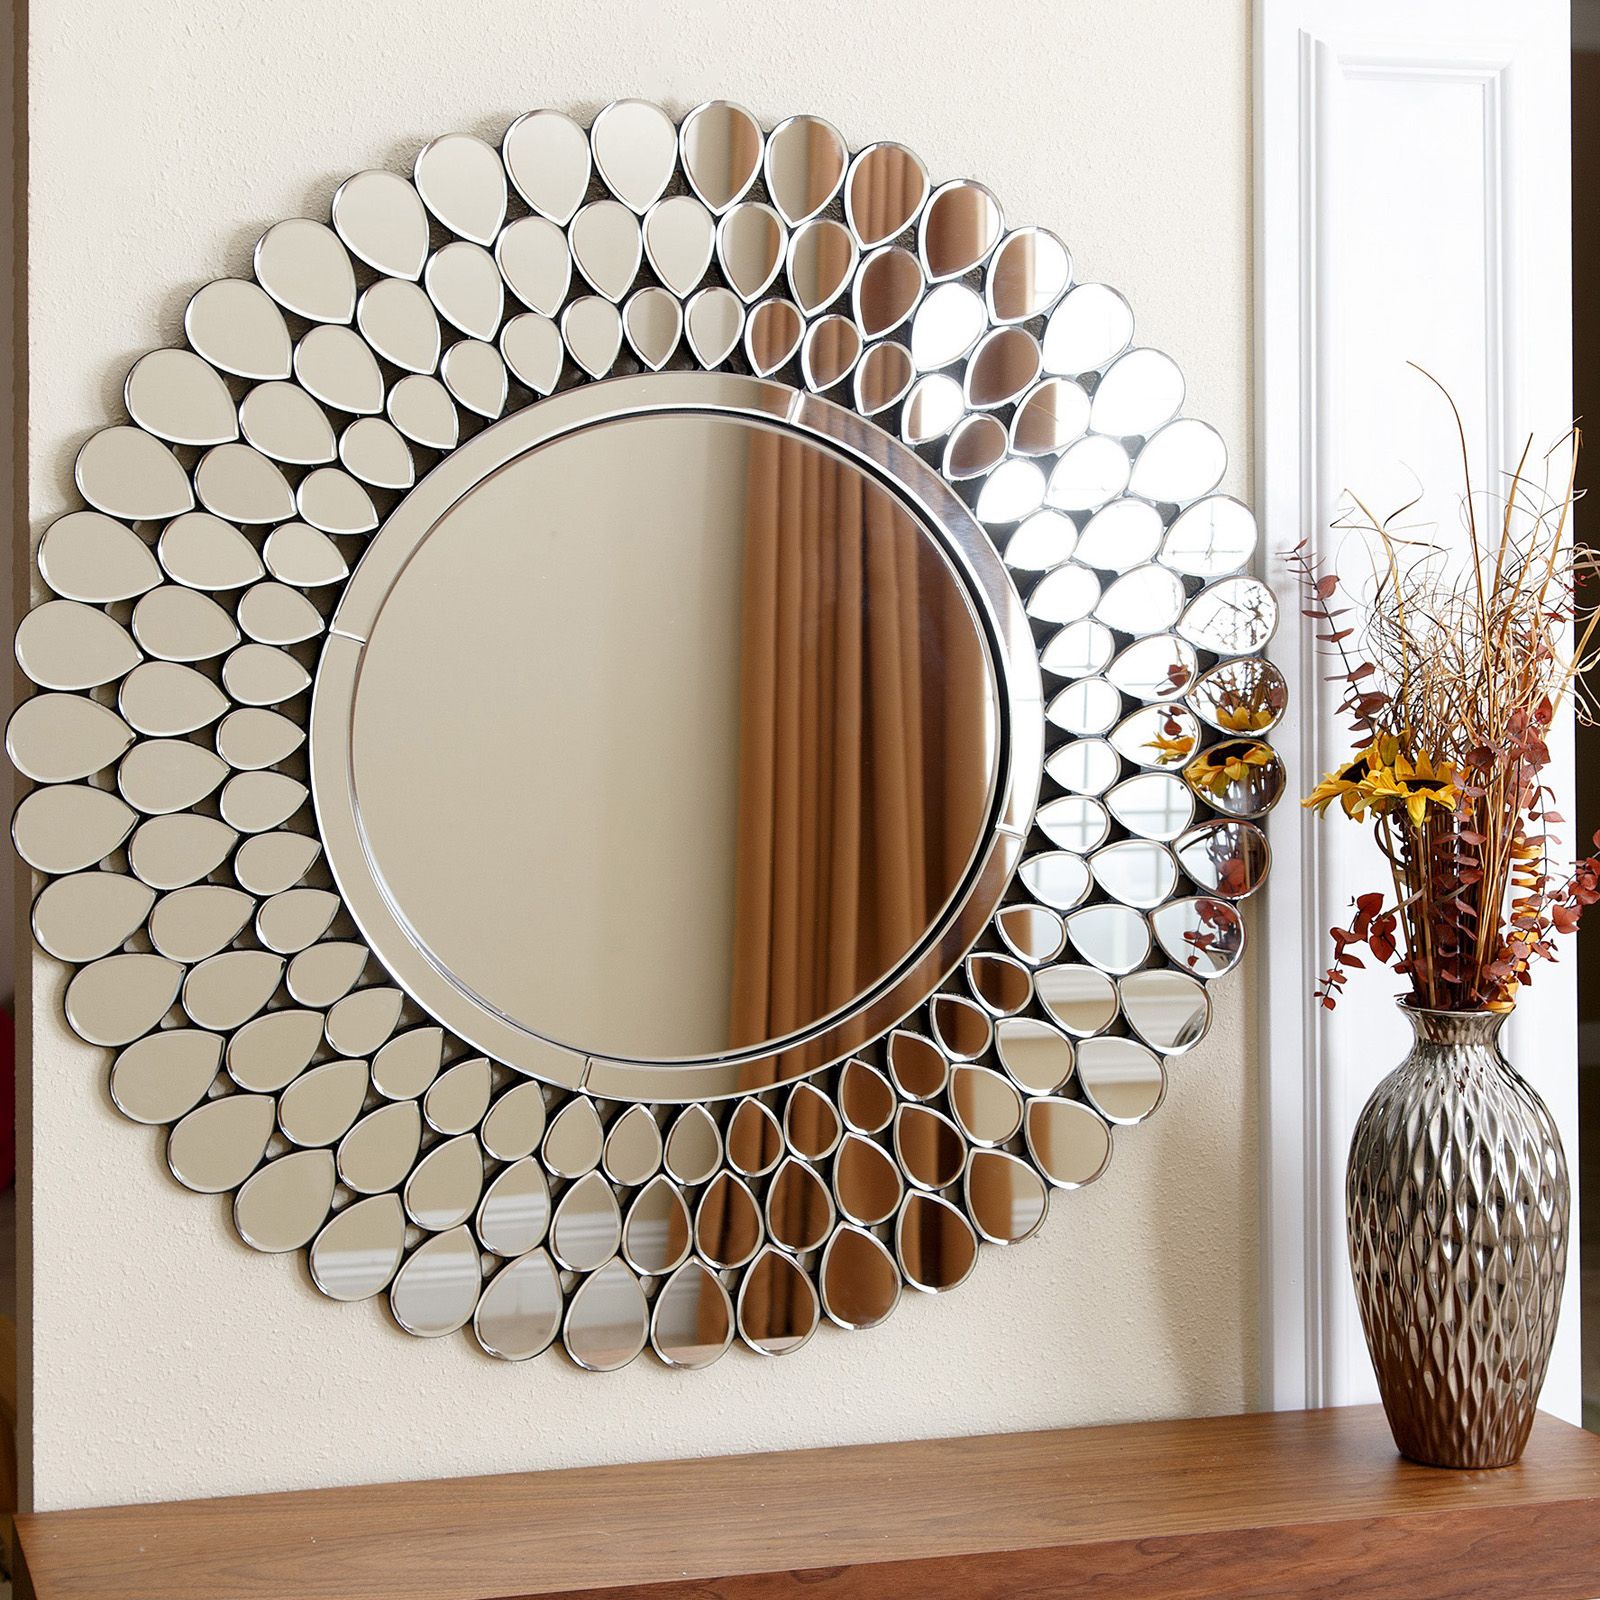 Abbyson Living Reagan Round Wall Mirror – Mirrors At Hayneedle For Jagged Edge Round Wall Mirrors (View 15 of 15)